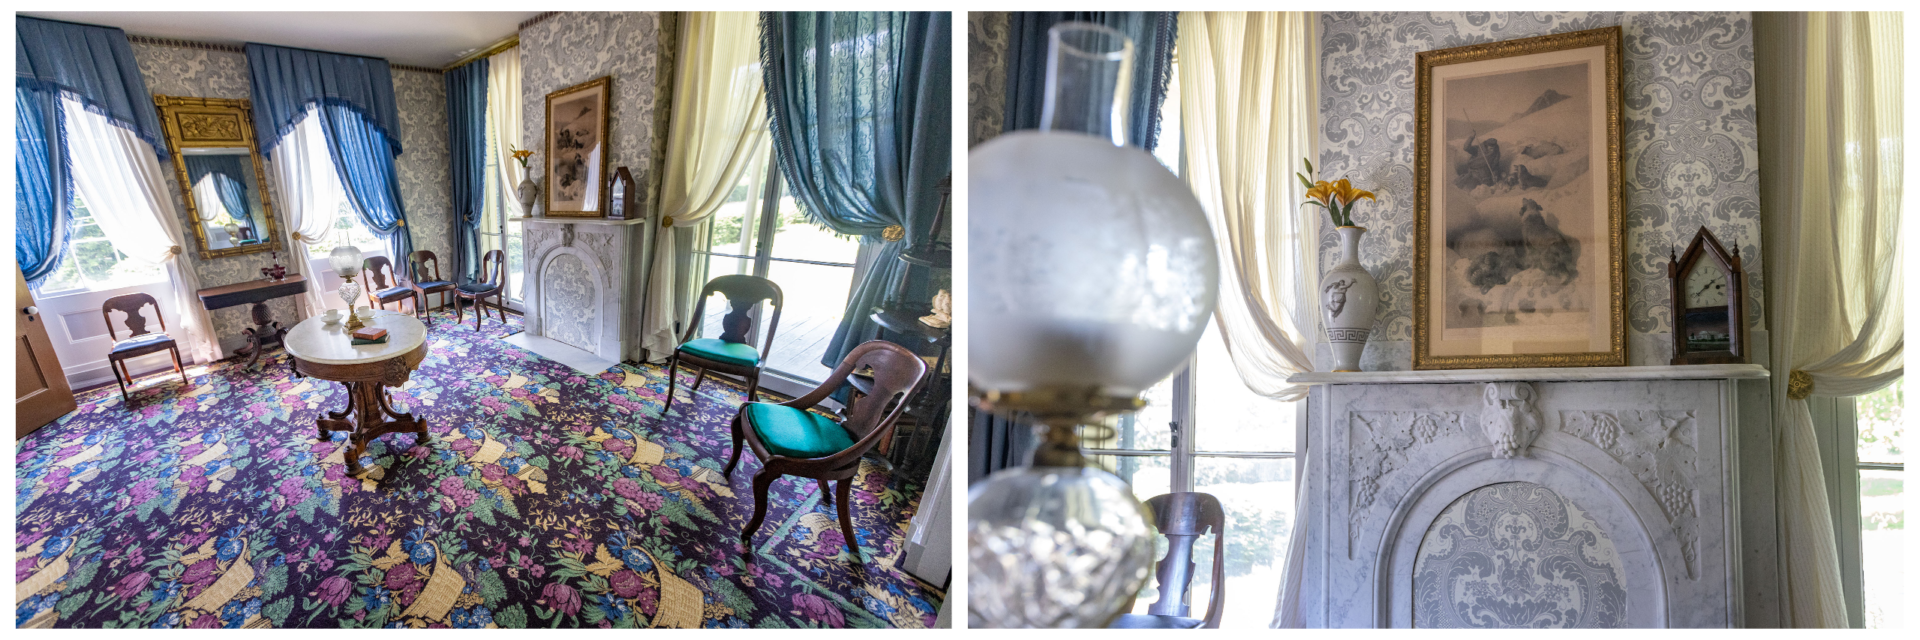 Left, the renovated parlor in the Emily Dickinson Museum looks more vibrant and alive with textured wallpaper and colorful carpeting. The marbletop table in the center of the room is one of the set pieces from the Apple TV+ series. Right, a closeup view of some of the items in the room, including a clock from &quot;Dickinson.&quot; (Jesse Costa/WBUR)